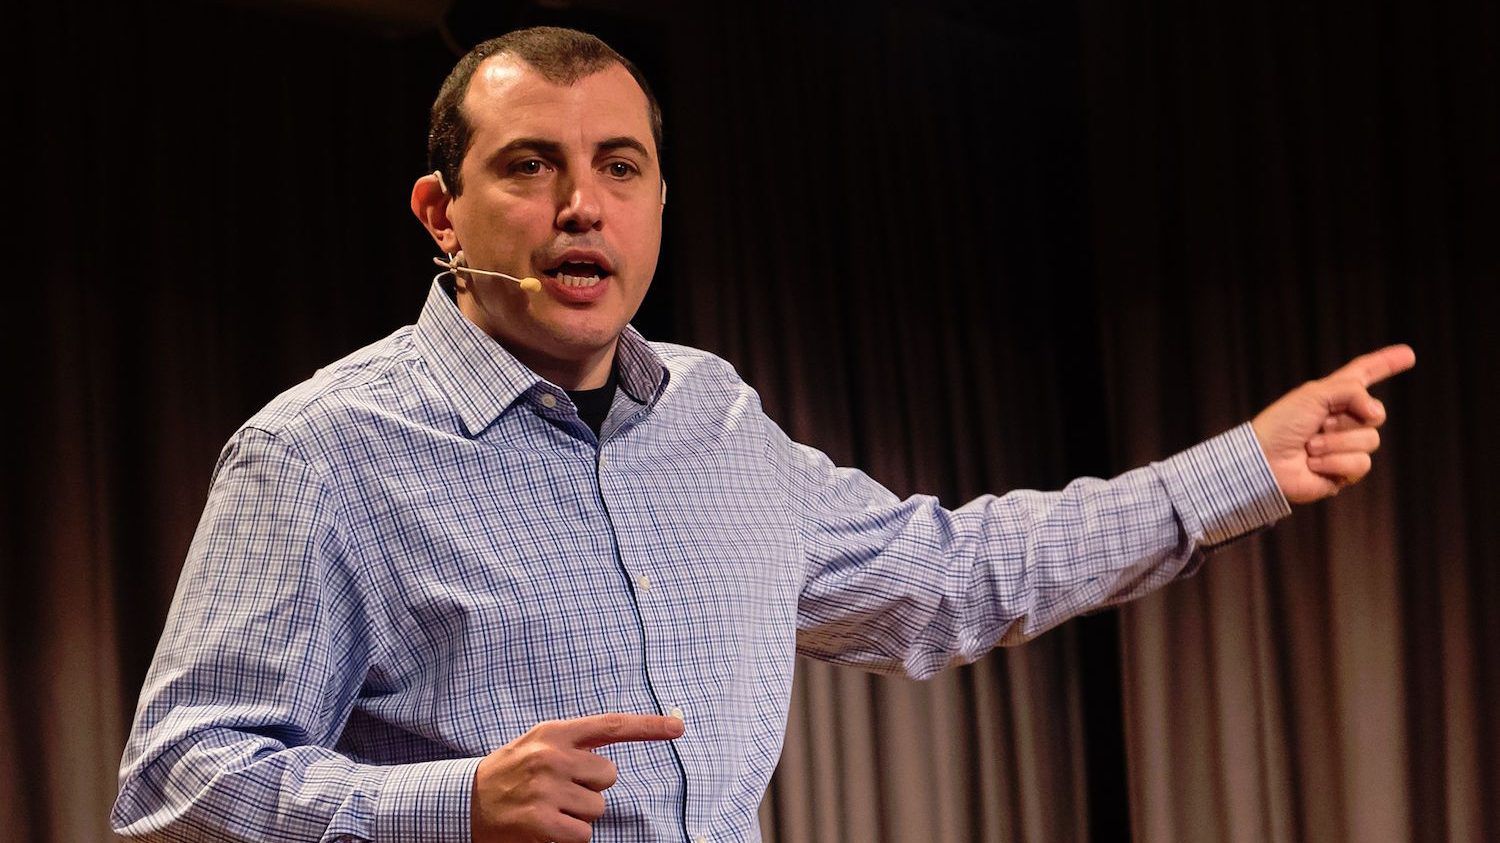 Andreas Antonopoulos got $1.5 million in bitcoin donations after Roger Ver 